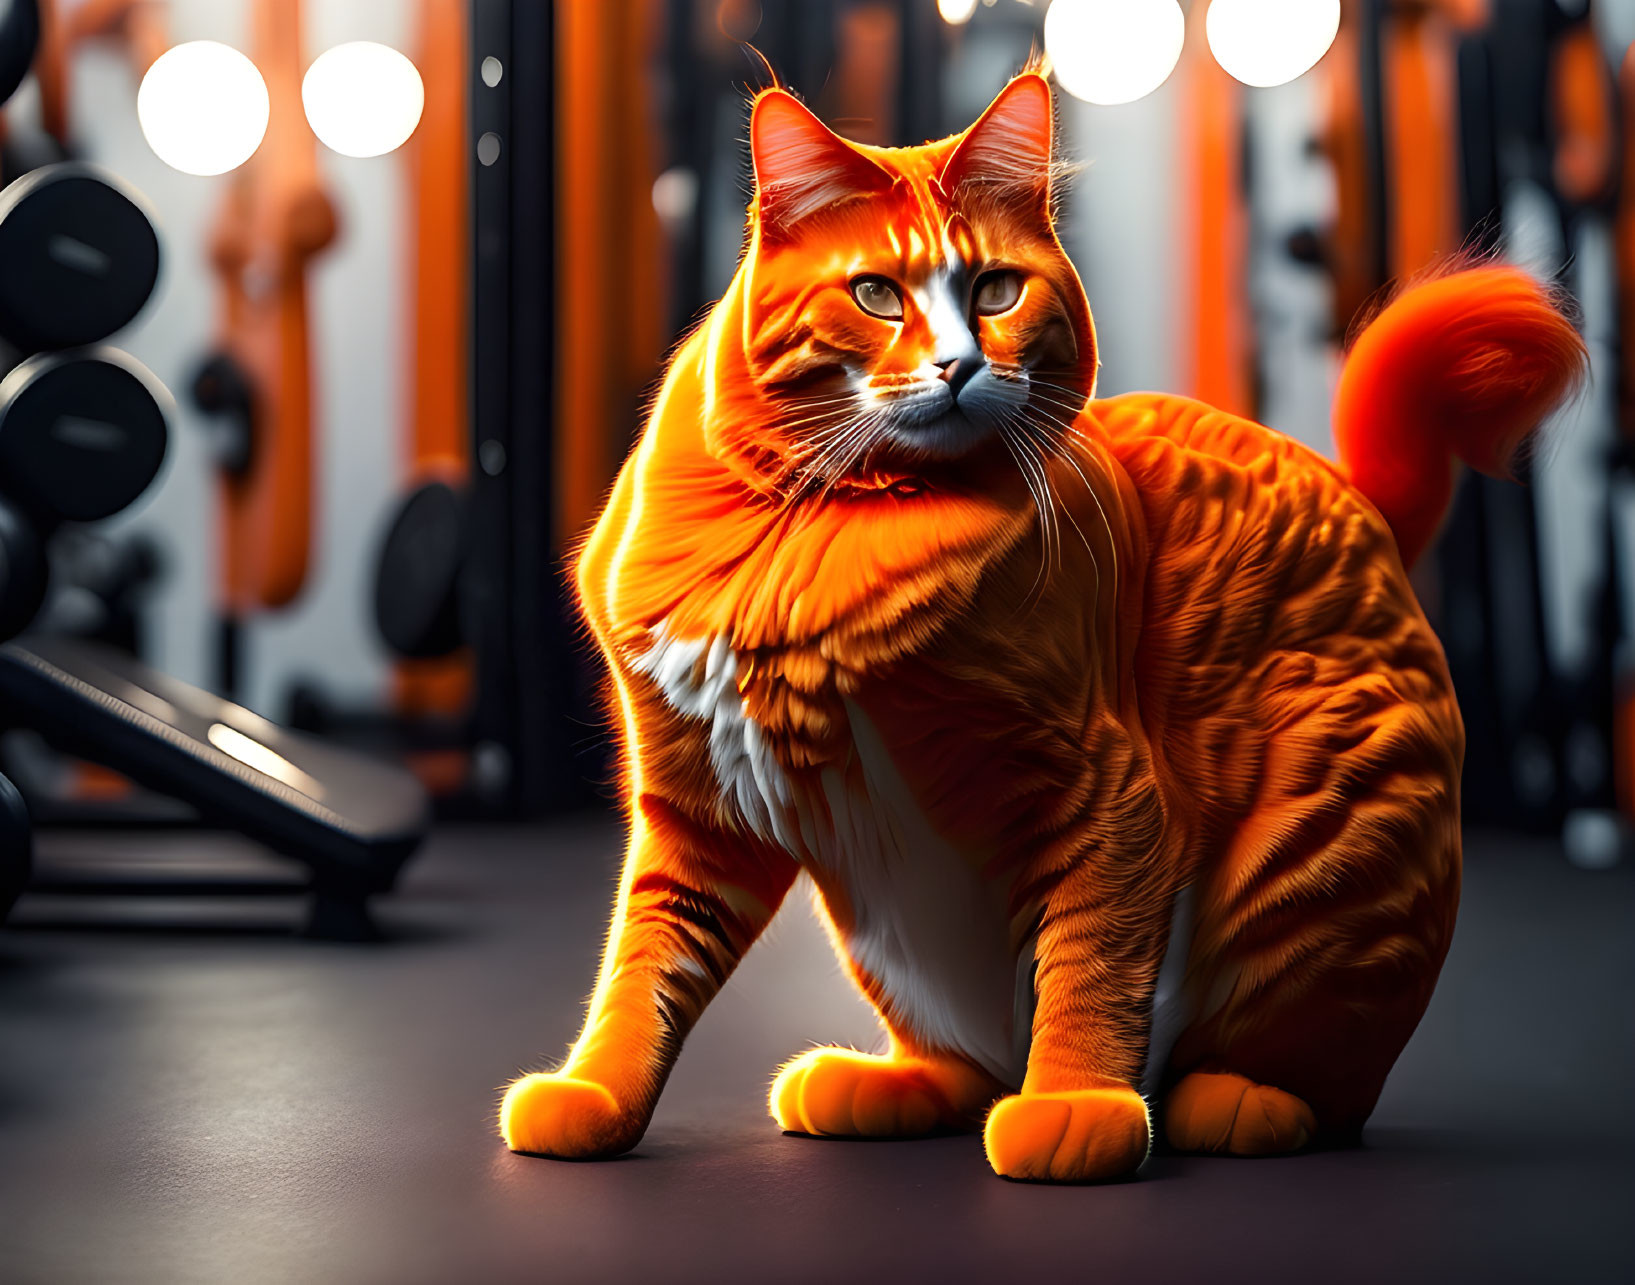 Orange Tabby Cat with Amber Eyes in Gym Setting with Weights